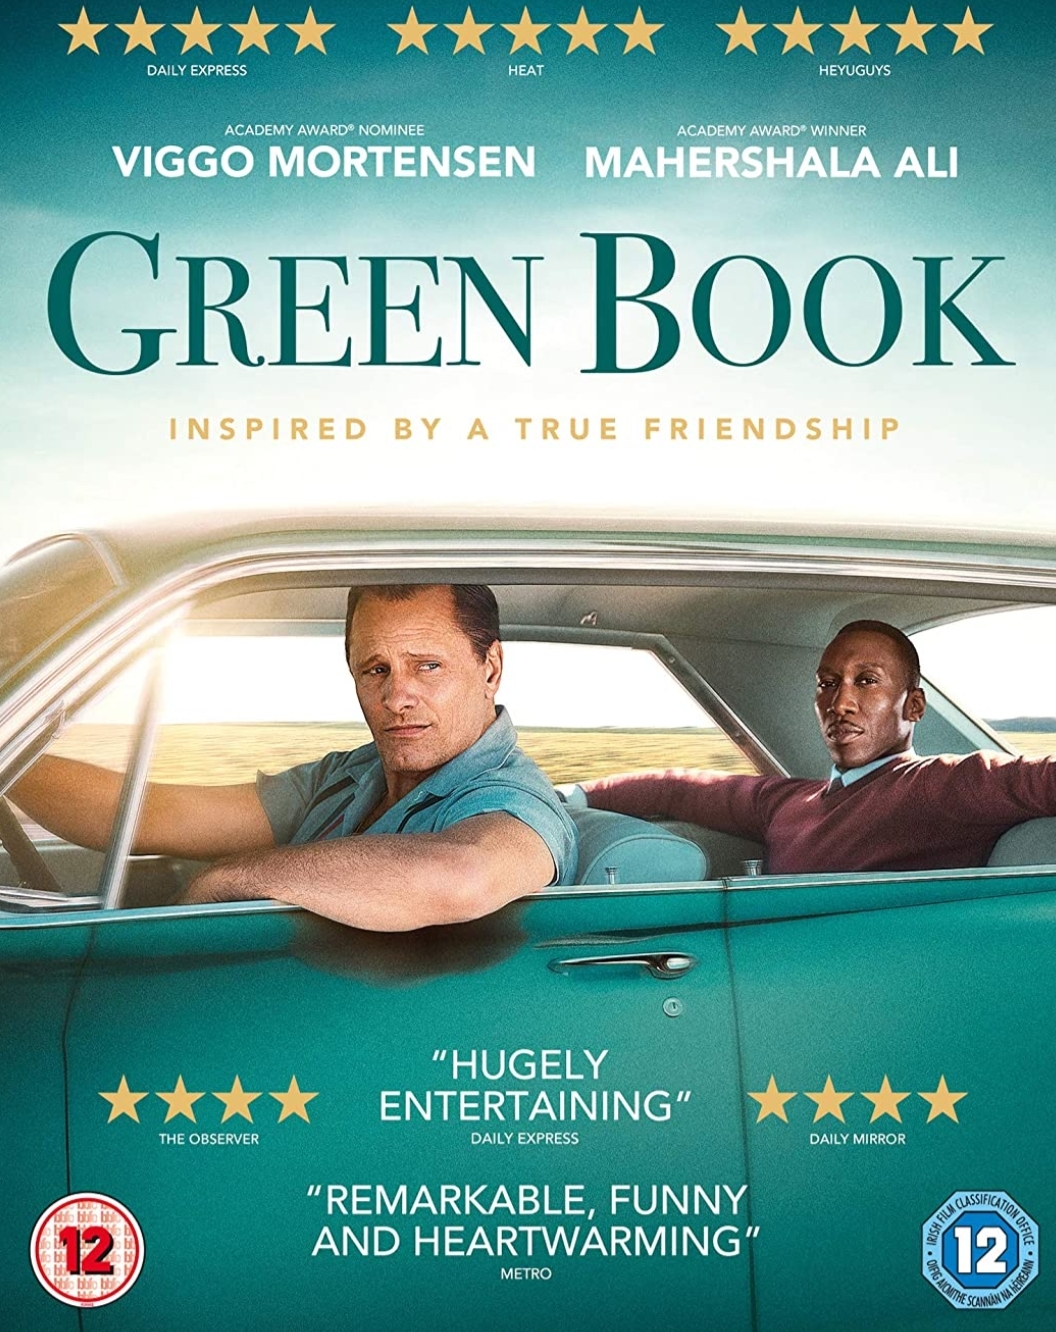 green book book review